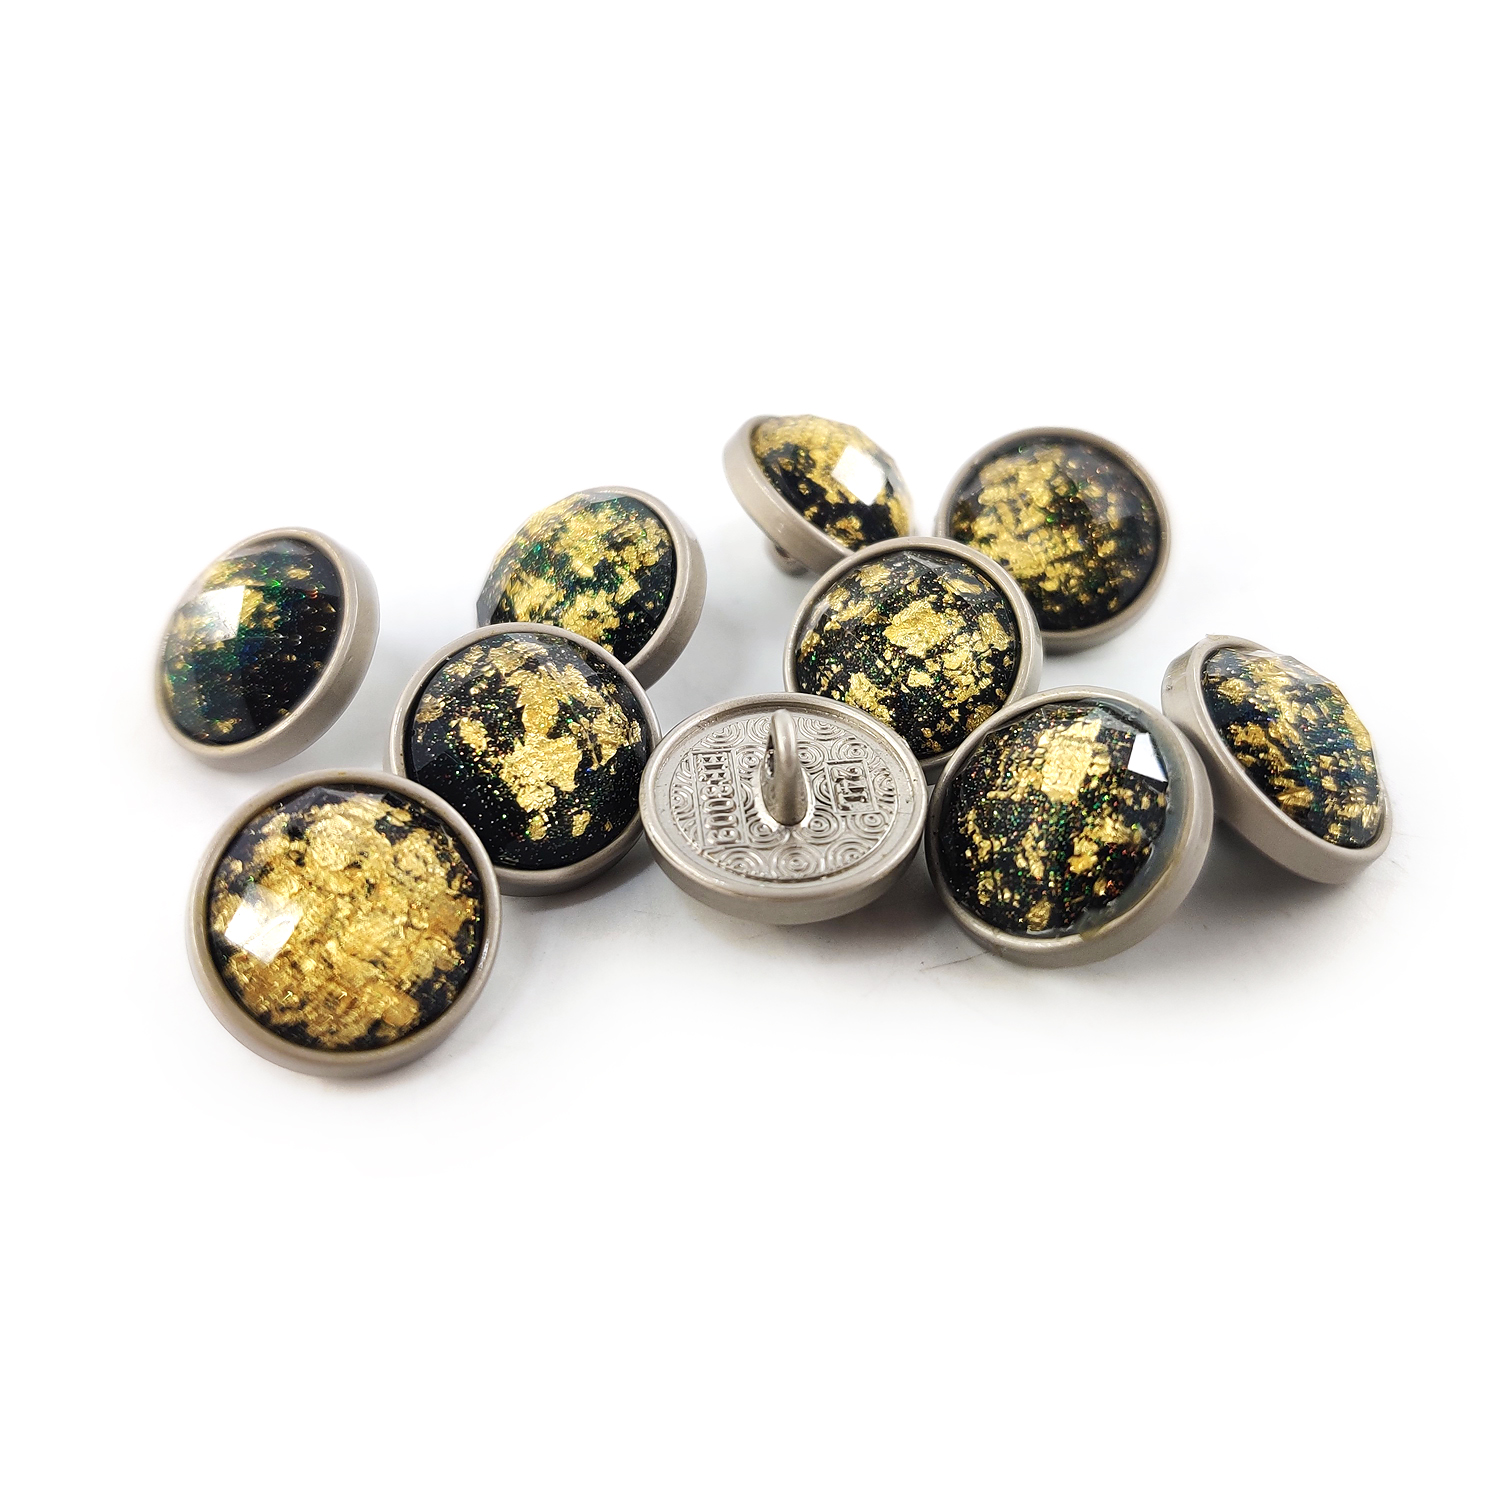 Craftisum 1 BLACK PEARL BUTTONS FOR SEWING CRAFTS 10 PCS [bn0022_5] -  $13.99 : Craftisum-art & crafts-Made with Love!